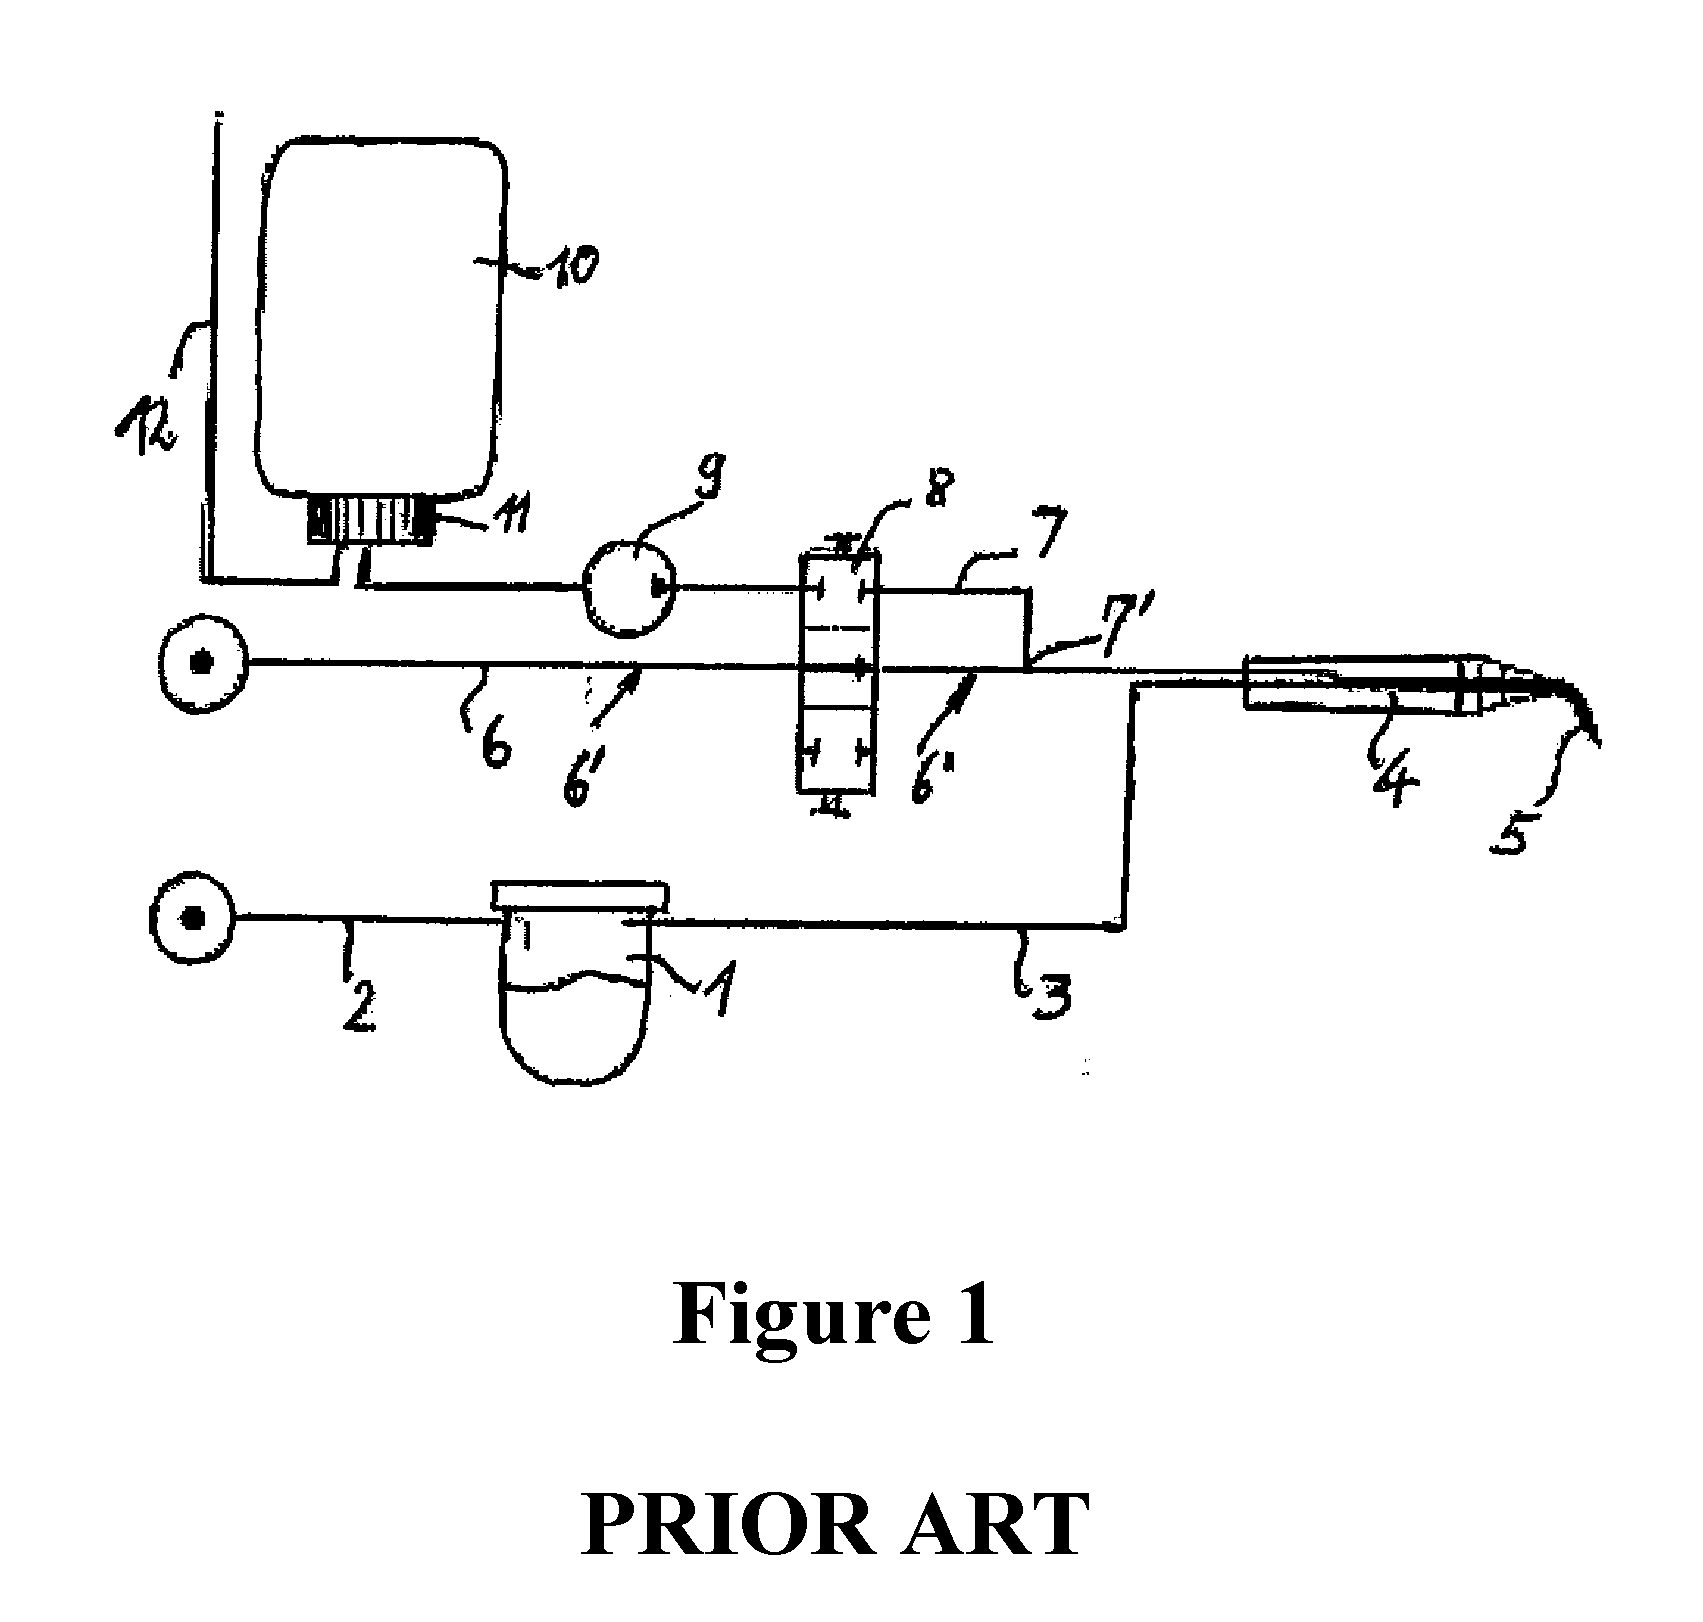 Powder for powder blasting, powder mixture and method of use for the treatment of tooth surfaces